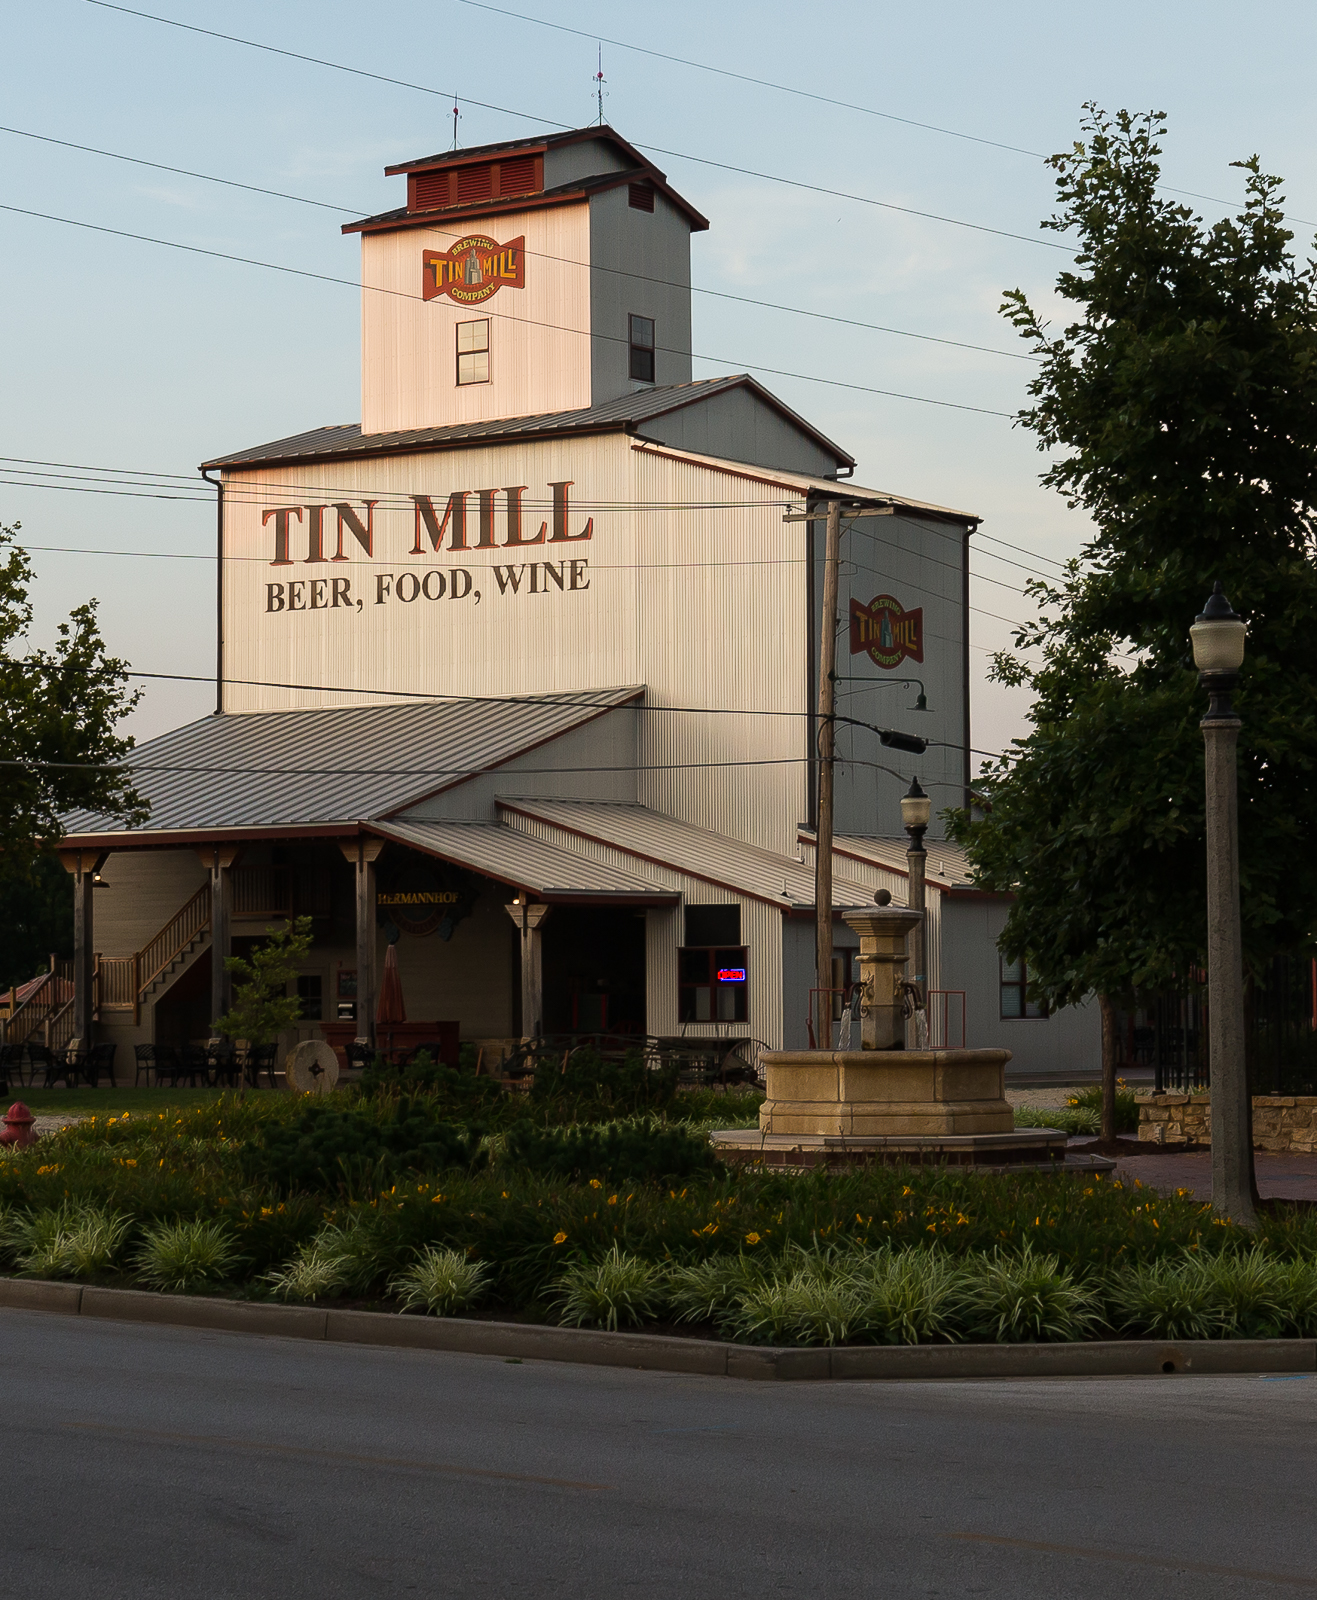  This is an excellent brewery in Hermann. Tin Mill Brewery has great seasonal beers on tap. I had a sour imperial red ale that was heavy on the oak which was a great capper to the day. 